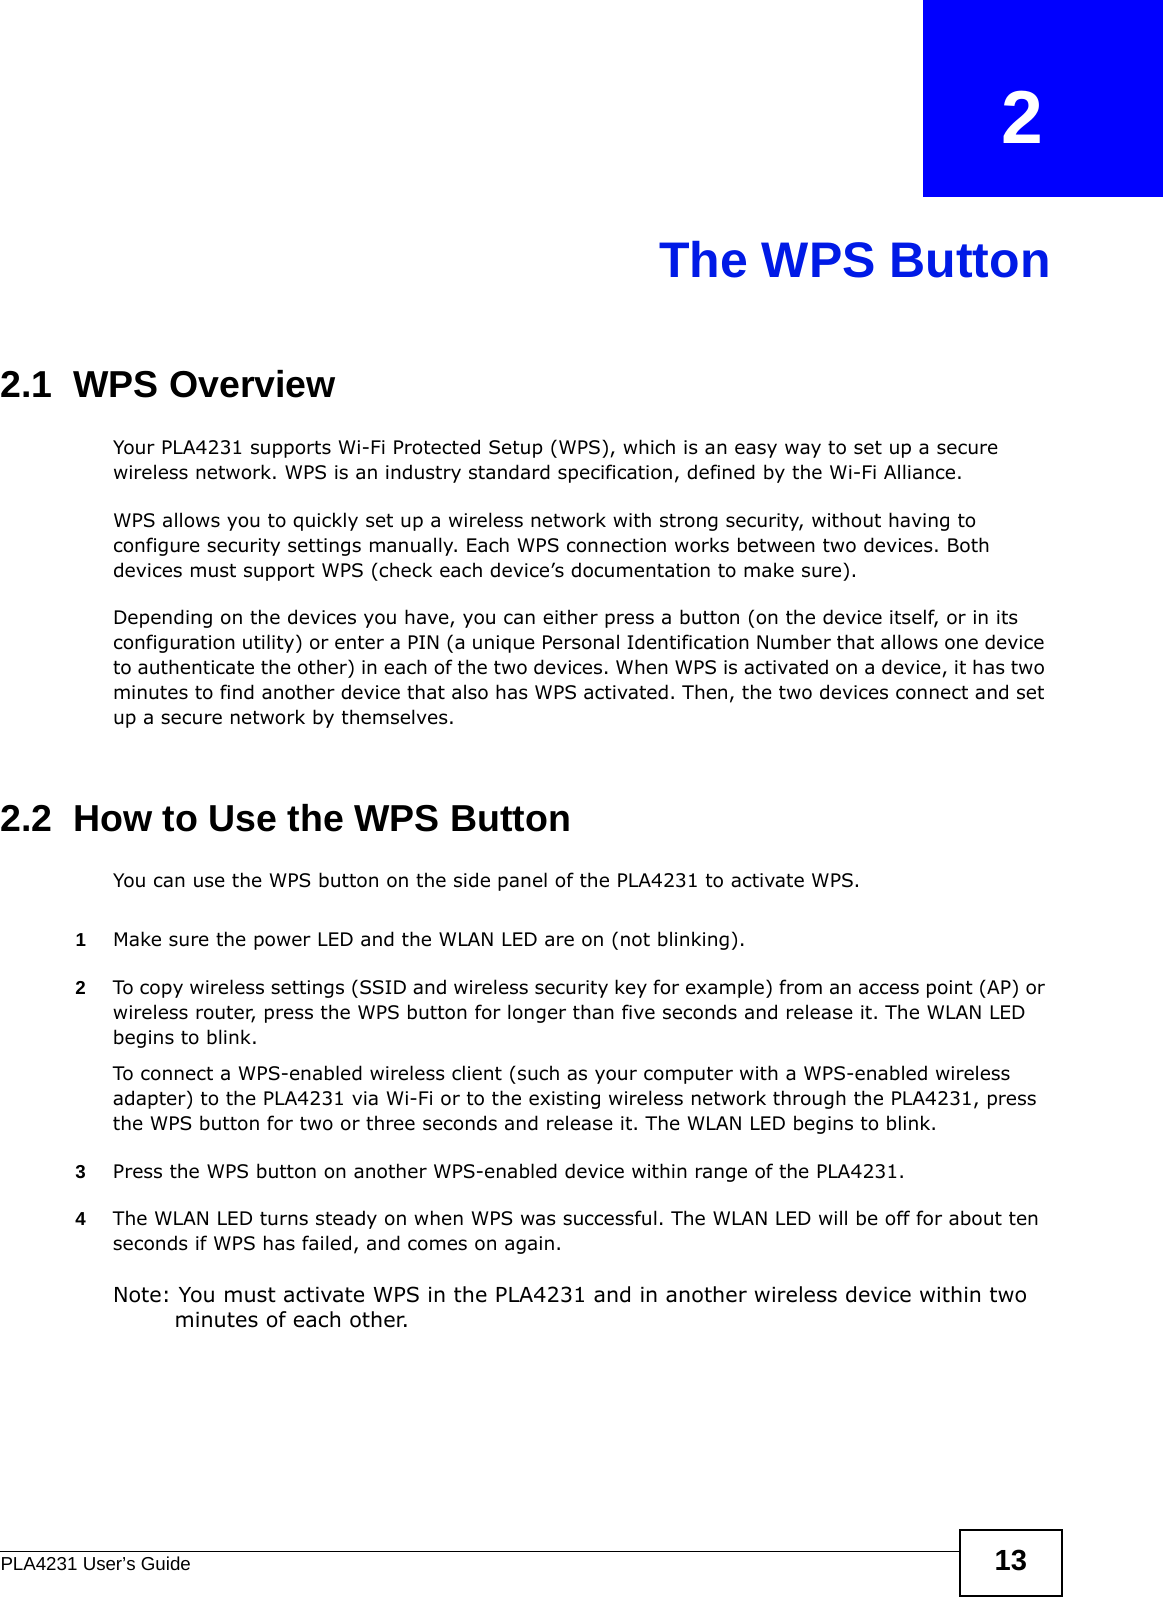 PLA4231 User’s Guide 13CHAPTER   2The WPS Button2.1  WPS OverviewYour PLA4231 supports Wi-Fi Protected Setup (WPS), which is an easy way to set up a secure wireless network. WPS is an industry standard specification, defined by the Wi-Fi Alliance.WPS allows you to quickly set up a wireless network with strong security, without having to configure security settings manually. Each WPS connection works between two devices. Both devices must support WPS (check each device’s documentation to make sure). Depending on the devices you have, you can either press a button (on the device itself, or in its configuration utility) or enter a PIN (a unique Personal Identification Number that allows one device to authenticate the other) in each of the two devices. When WPS is activated on a device, it has two minutes to find another device that also has WPS activated. Then, the two devices connect and set up a secure network by themselves.2.2  How to Use the WPS ButtonYou can use the WPS button on the side panel of the PLA4231 to activate WPS.1Make sure the power LED and the WLAN LED are on (not blinking).2To copy wireless settings (SSID and wireless security key for example) from an access point (AP) or wireless router, press the WPS button for longer than five seconds and release it. The WLAN LED begins to blink.To connect a WPS-enabled wireless client (such as your computer with a WPS-enabled wireless adapter) to the PLA4231 via Wi-Fi or to the existing wireless network through the PLA4231, press the WPS button for two or three seconds and release it. The WLAN LED begins to blink.3Press the WPS button on another WPS-enabled device within range of the PLA4231. 4The WLAN LED turns steady on when WPS was successful. The WLAN LED will be off for about ten seconds if WPS has failed, and comes on again. Note: You must activate WPS in the PLA4231 and in another wireless device within two minutes of each other. 